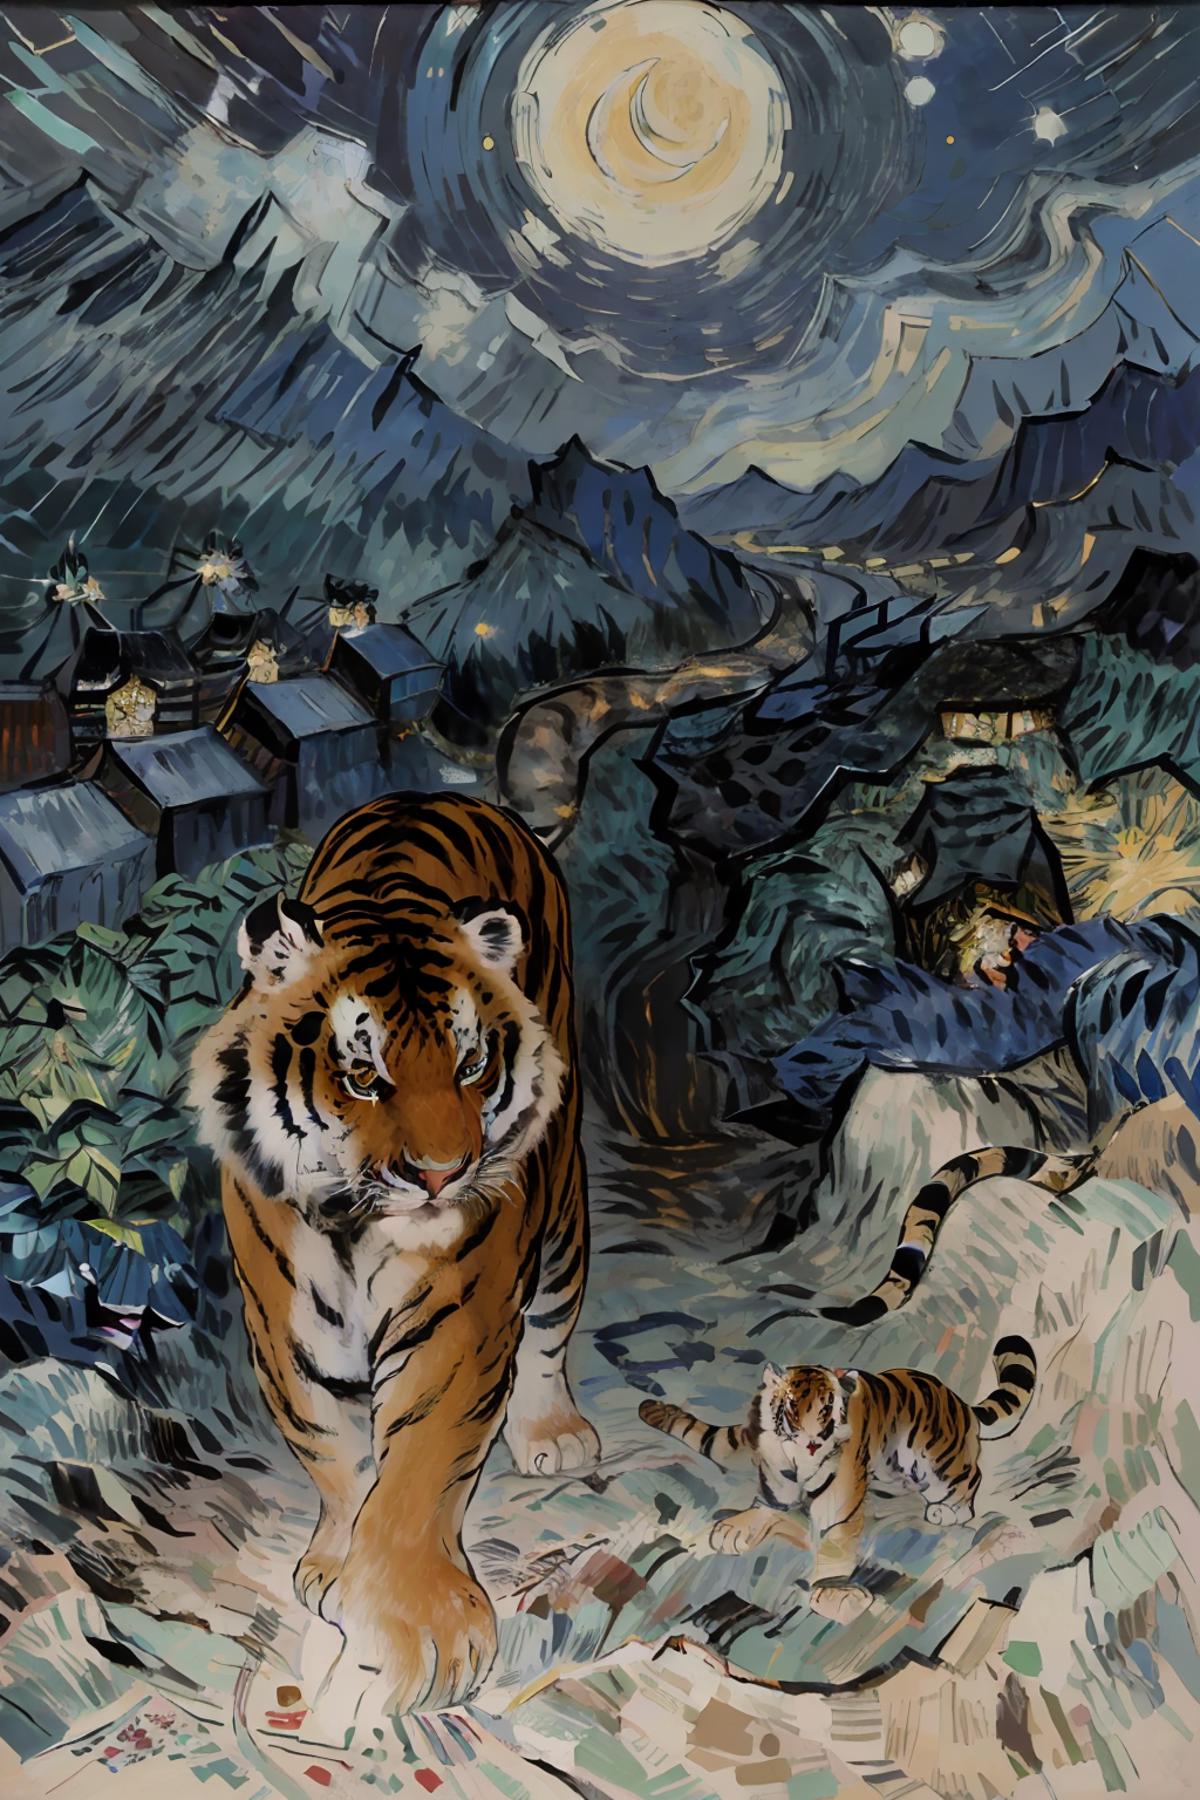 A large tiger walking through a village with a baby tiger.